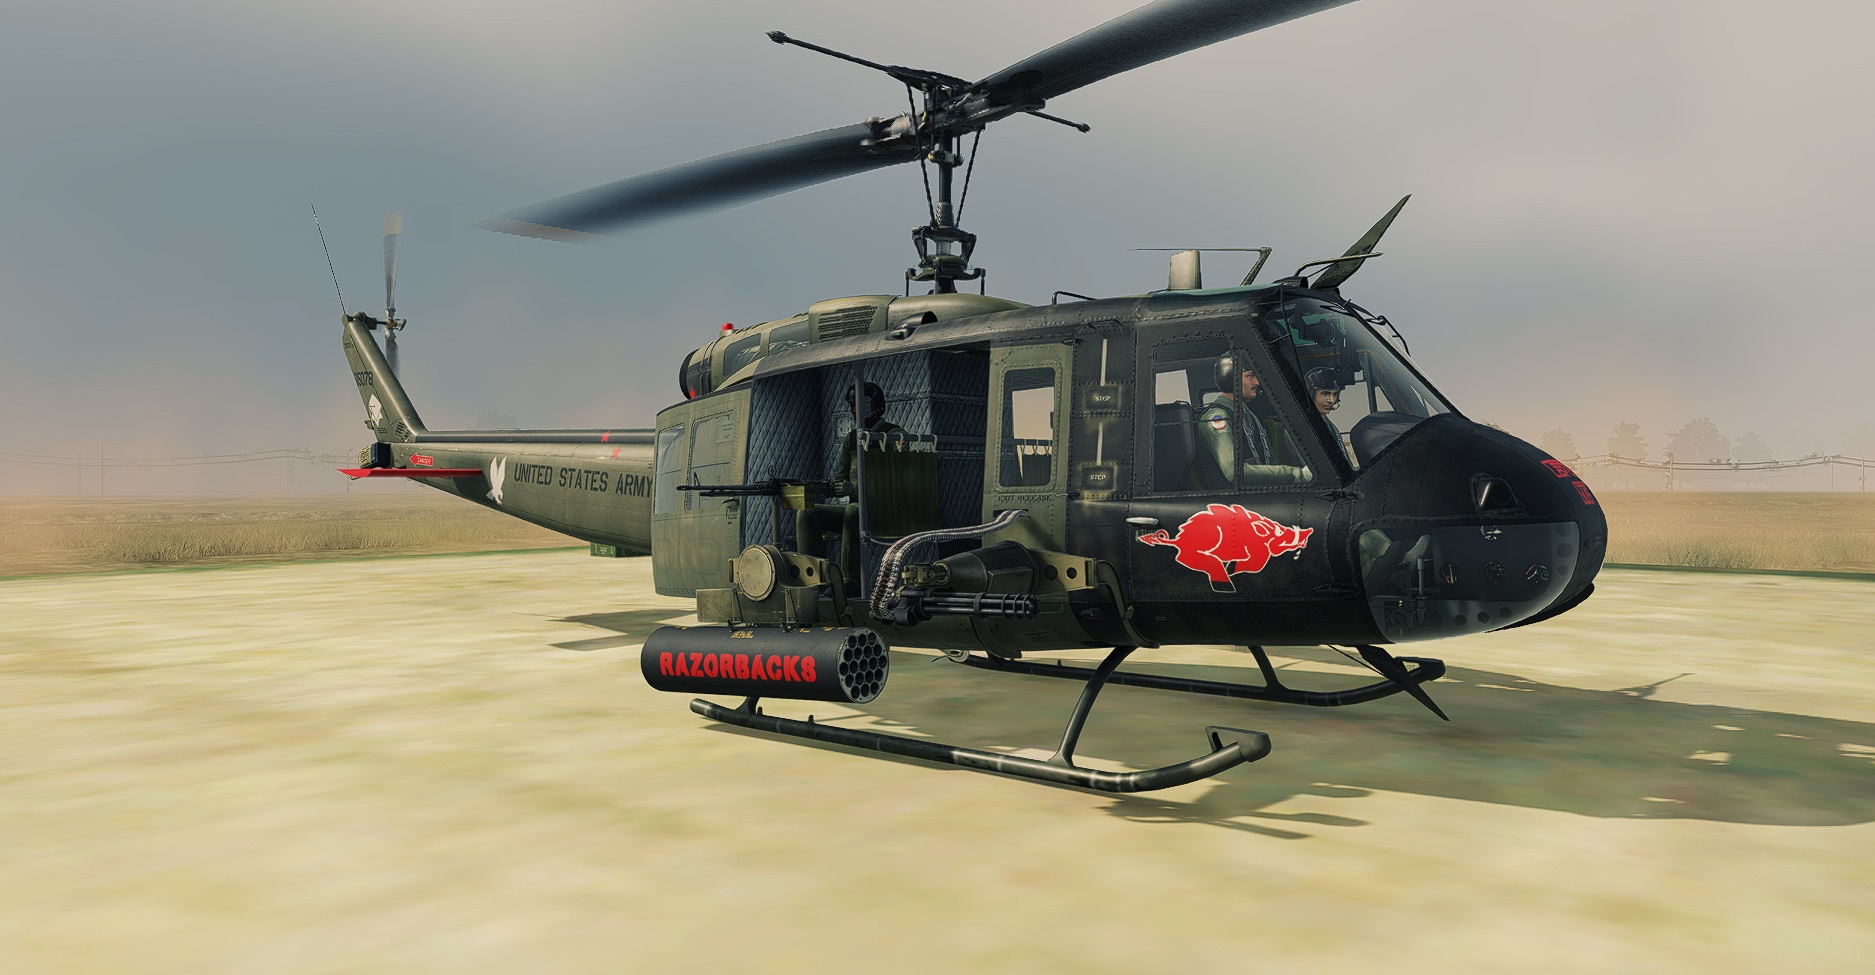 UH-1H 120th Assault Helicopter Company, The Razorbacks "Captain Guts"